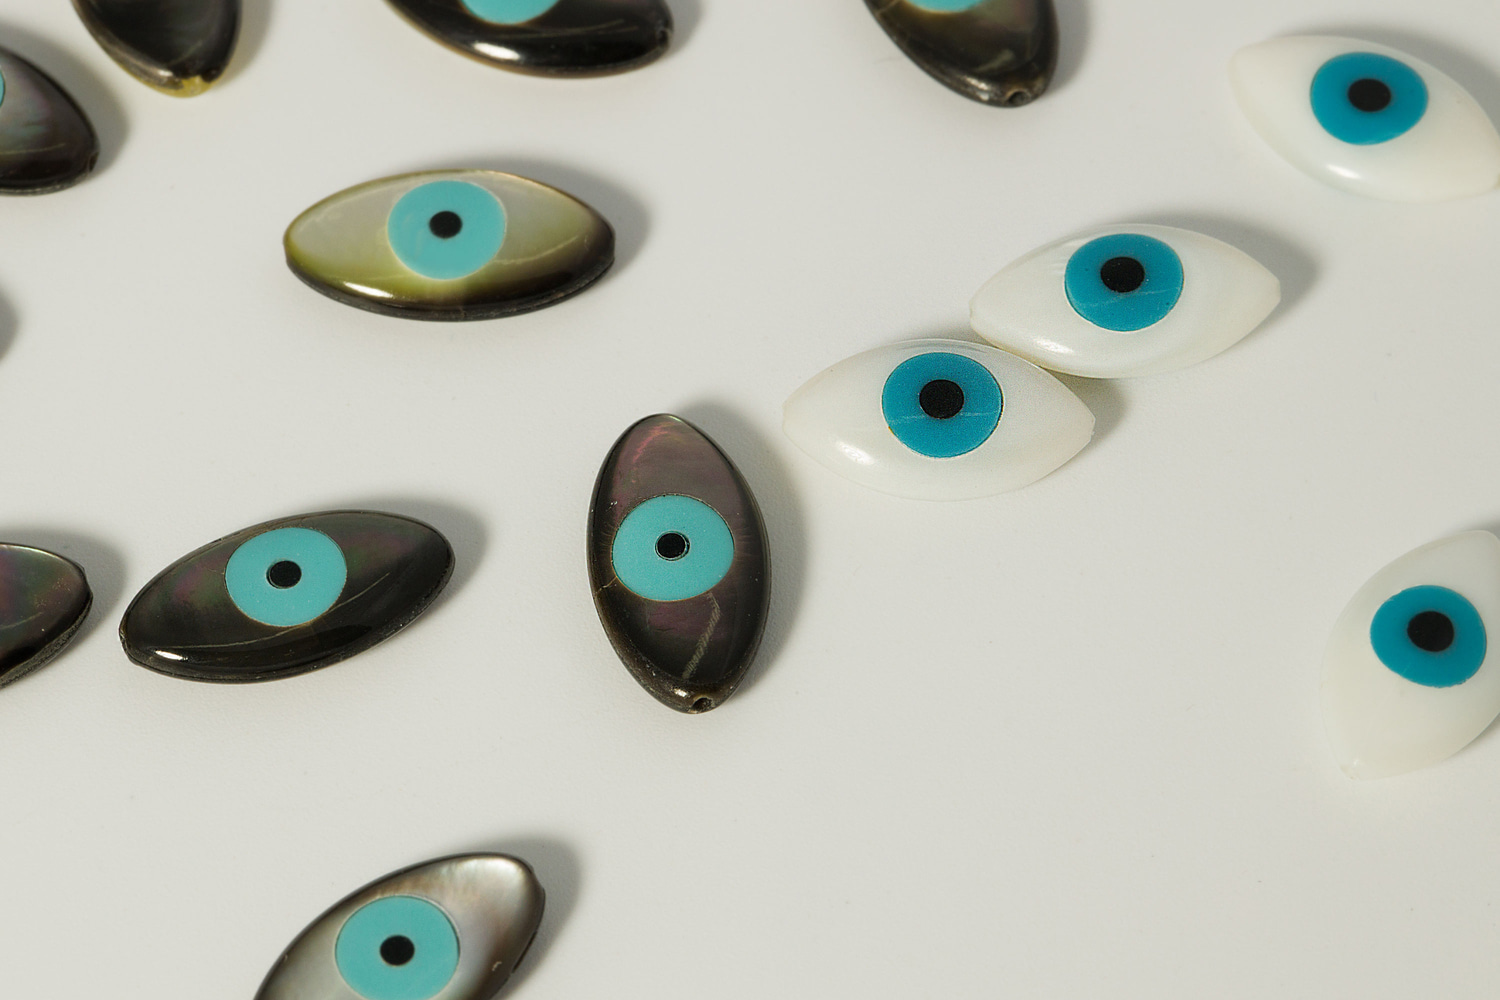 [O1-VC1] Evil eye mother-of pearl bead, Mother-of pearl, Jewelry making supplies, Ocean Themed Jewelry, 1 piece (O1-R1, O1-R2)